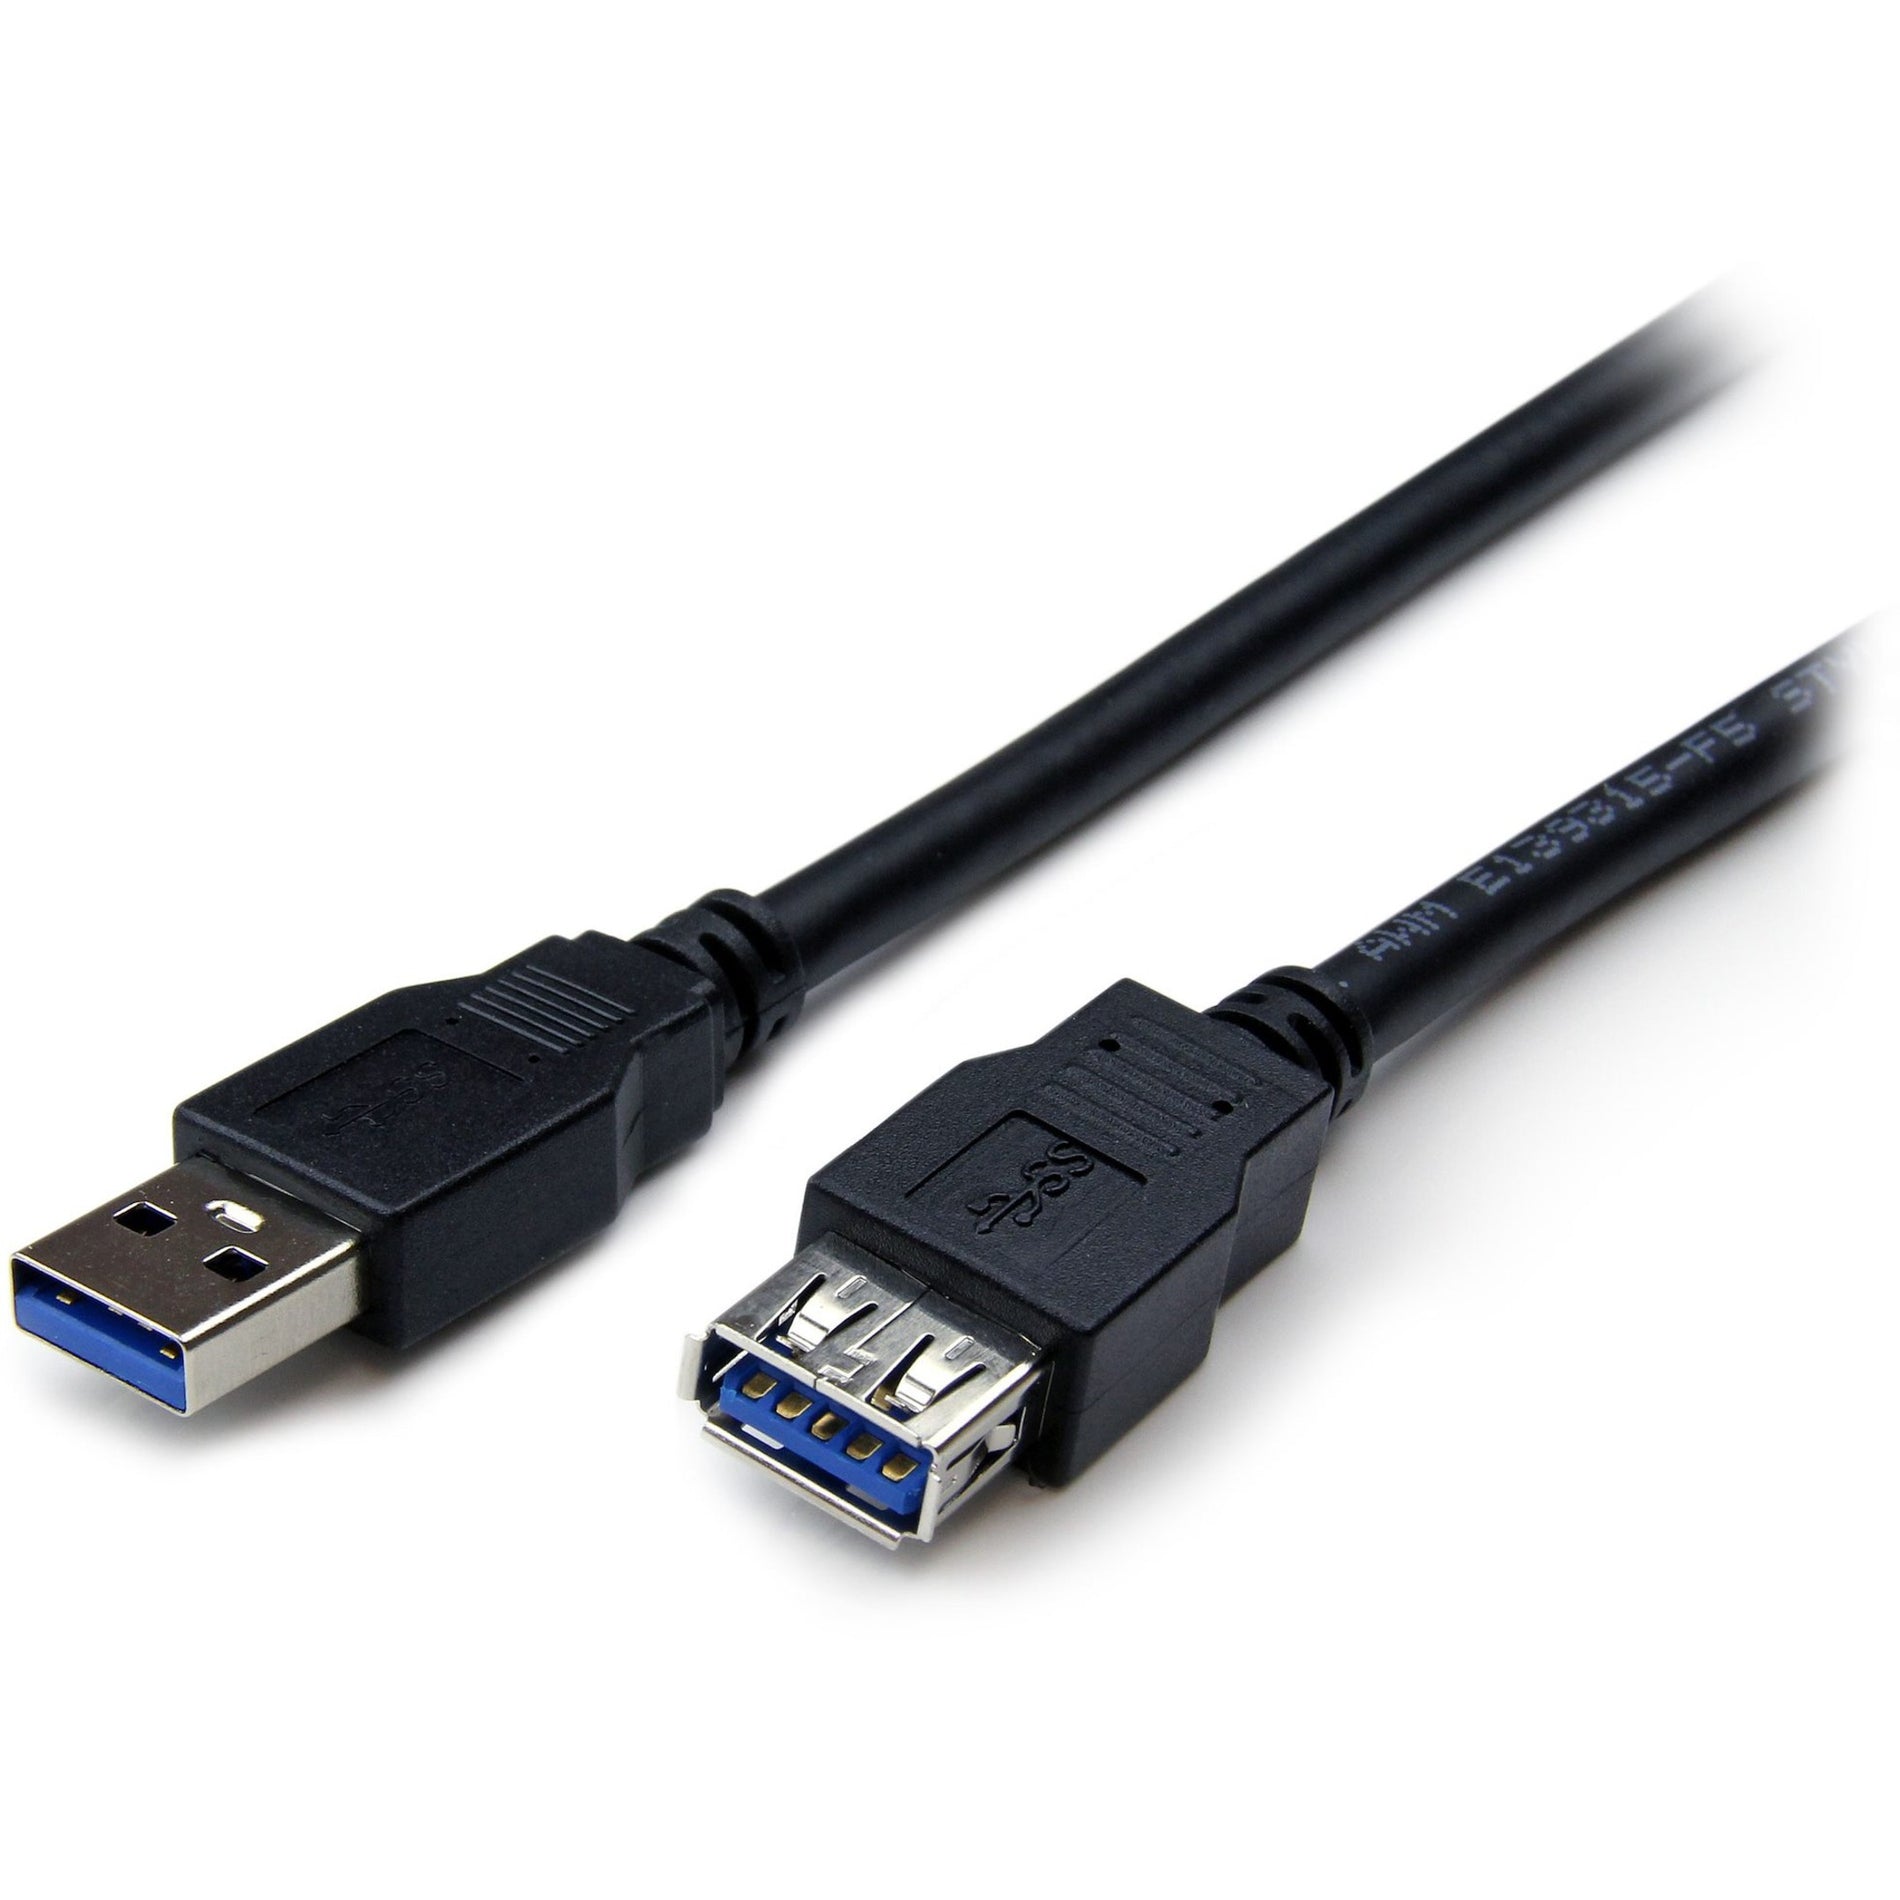 StarTech.com USB3SEXT6BK 6 ft Black SuperSpeed USB 3.0 Extension Cable A to A - M/F, High-Speed Data Transfer, Lifetime Warranty